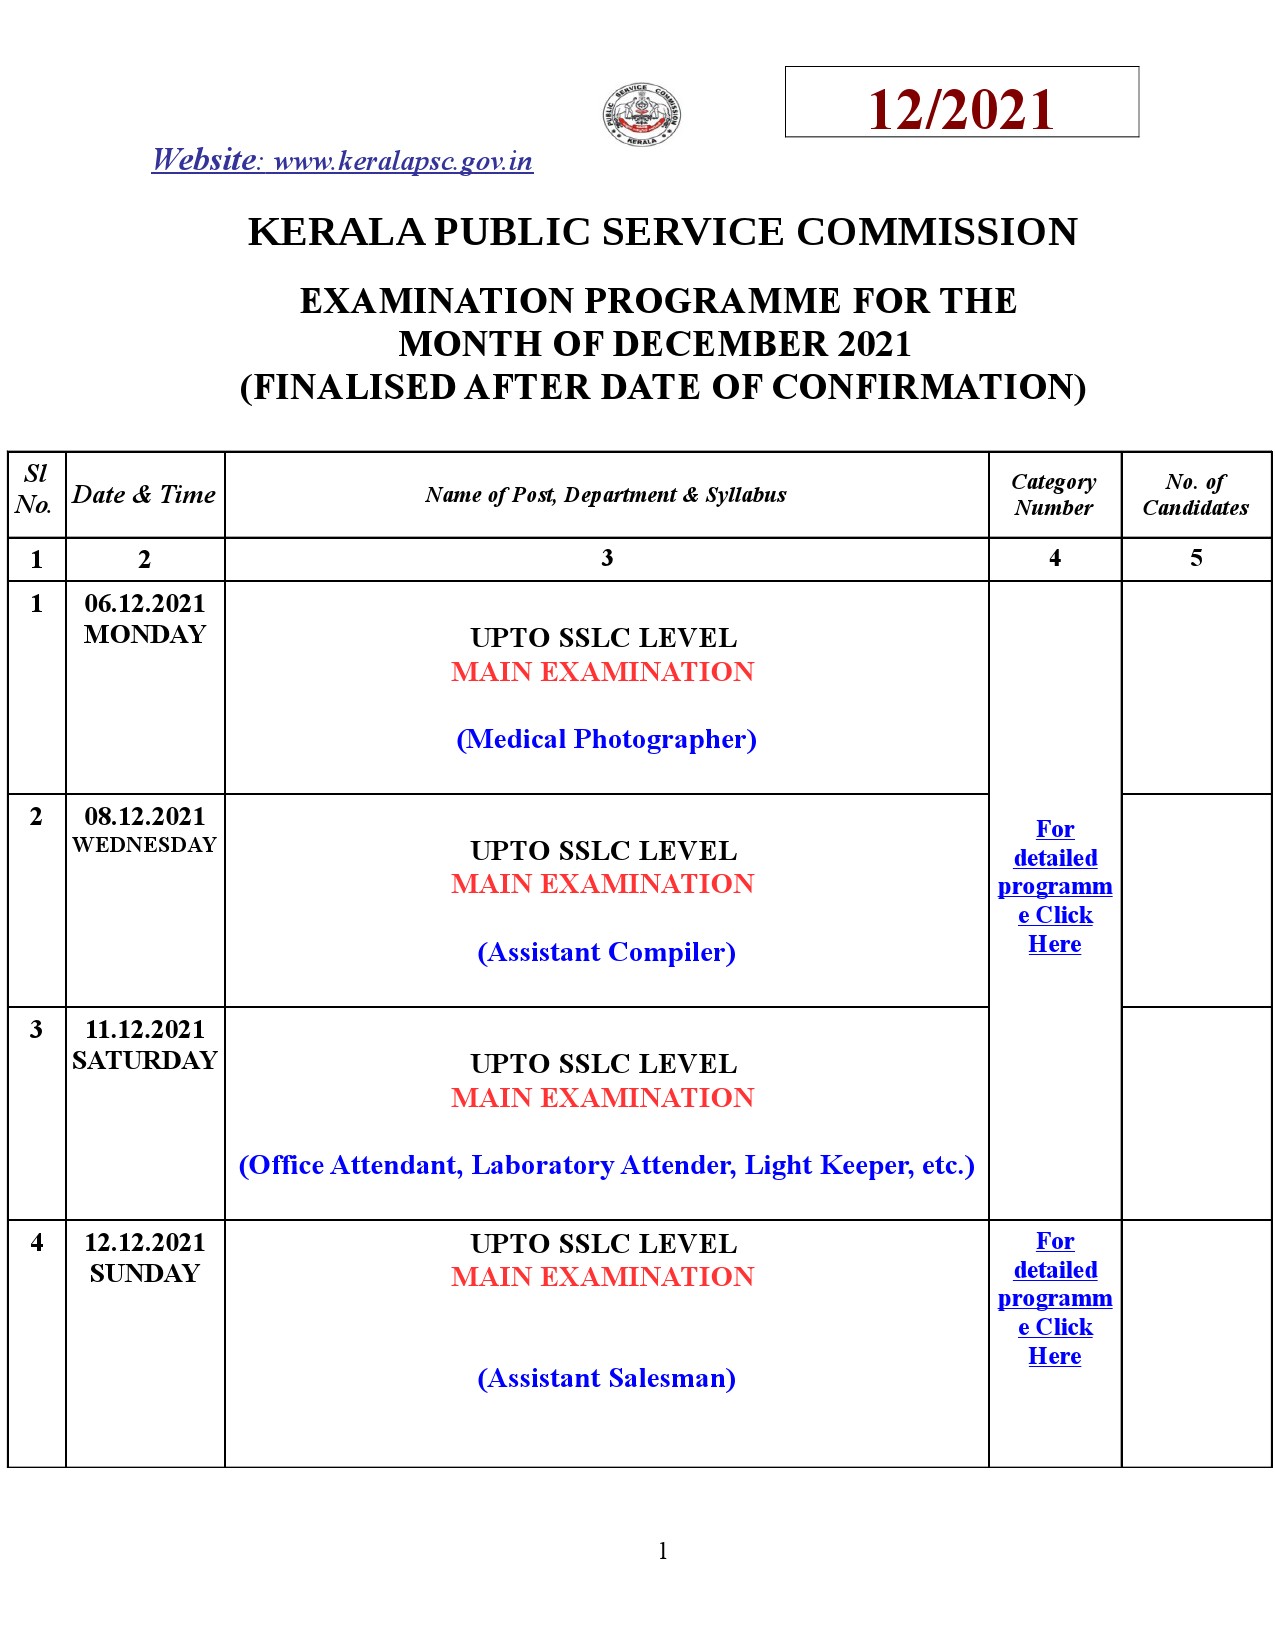 KPSC Examination Programme For The Month Of December 2021 - Notification Image 1